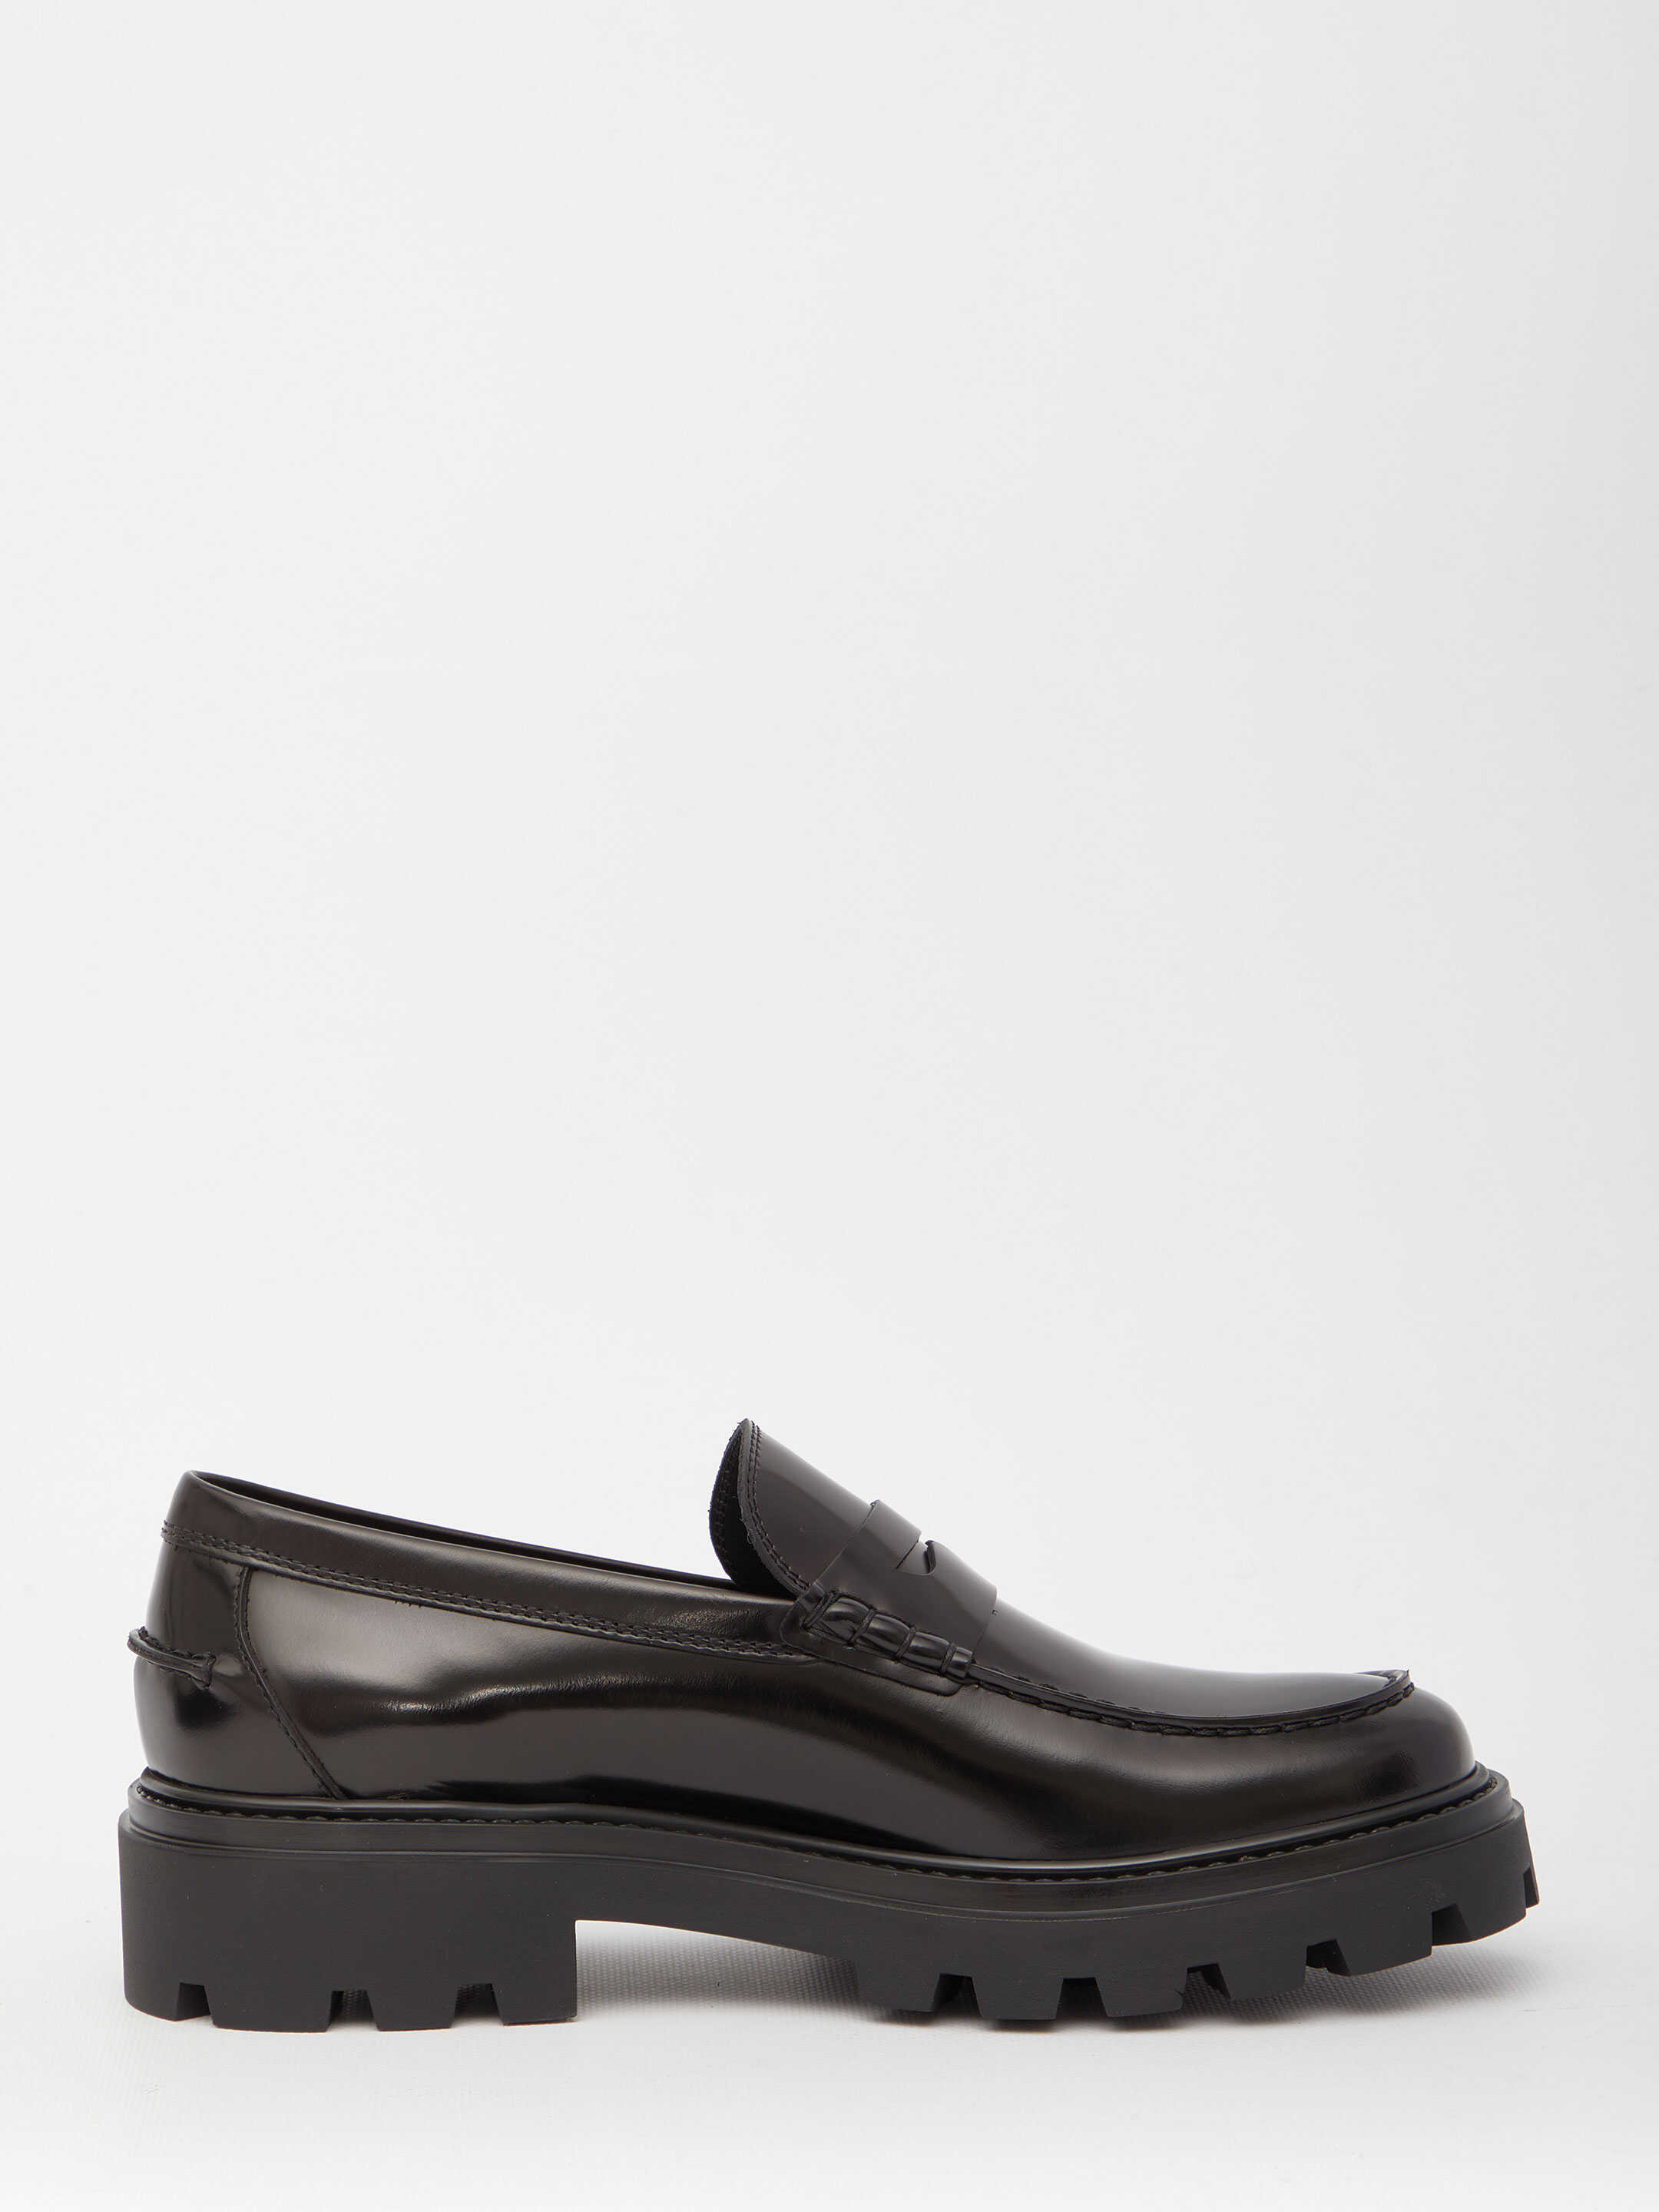 TOD'S Leather Loafers Black image1